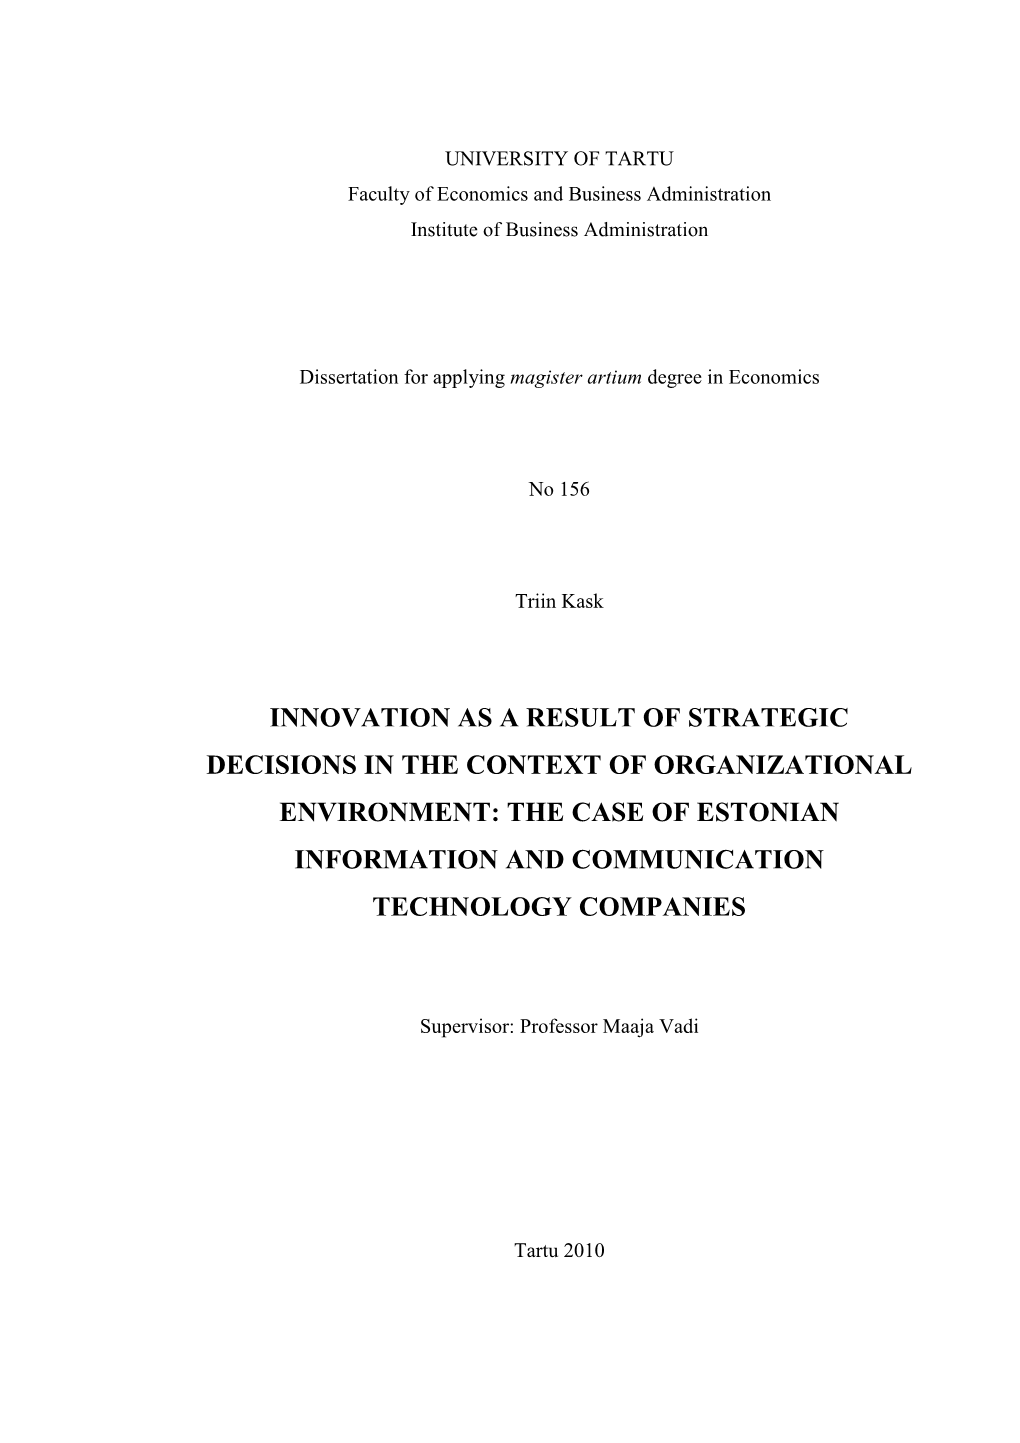 Innovation As a Result of Strategic Decisions in the Context of Organizational Environment: the Case of Estonian Information and Communication Technology Companies